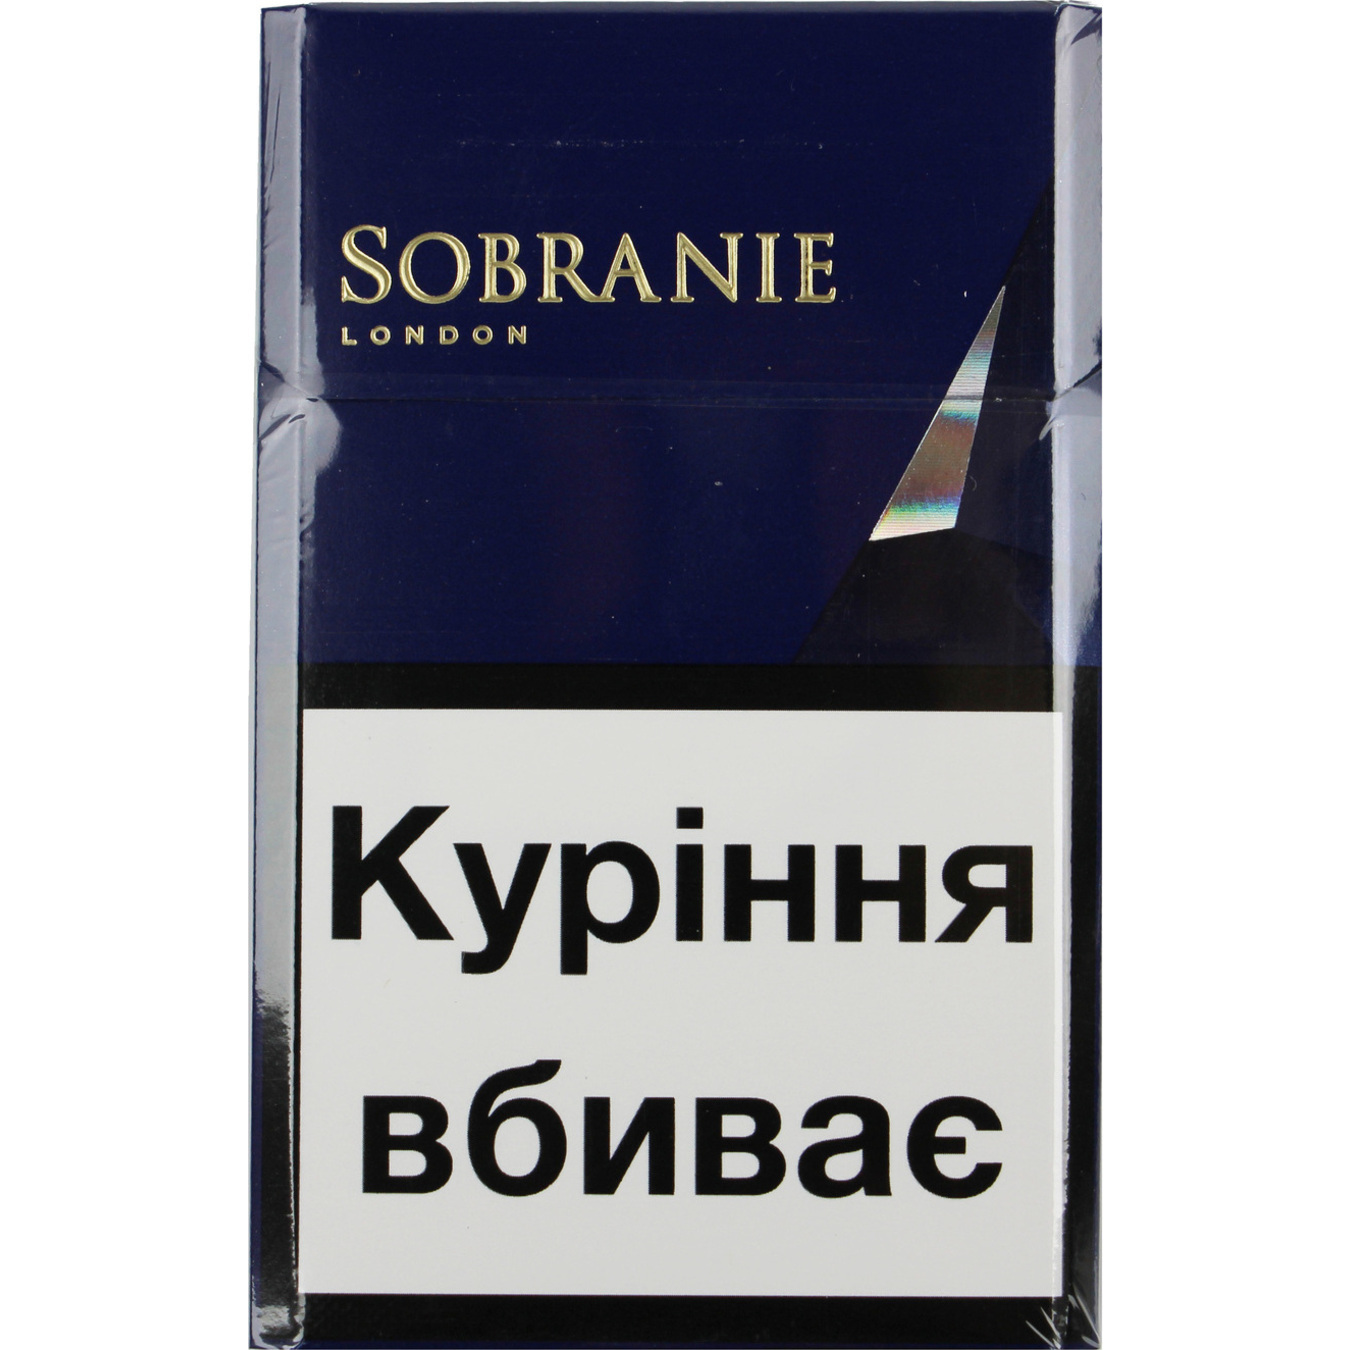 Sobranie Blue Cigarettes (the price is indicated without excise tax)